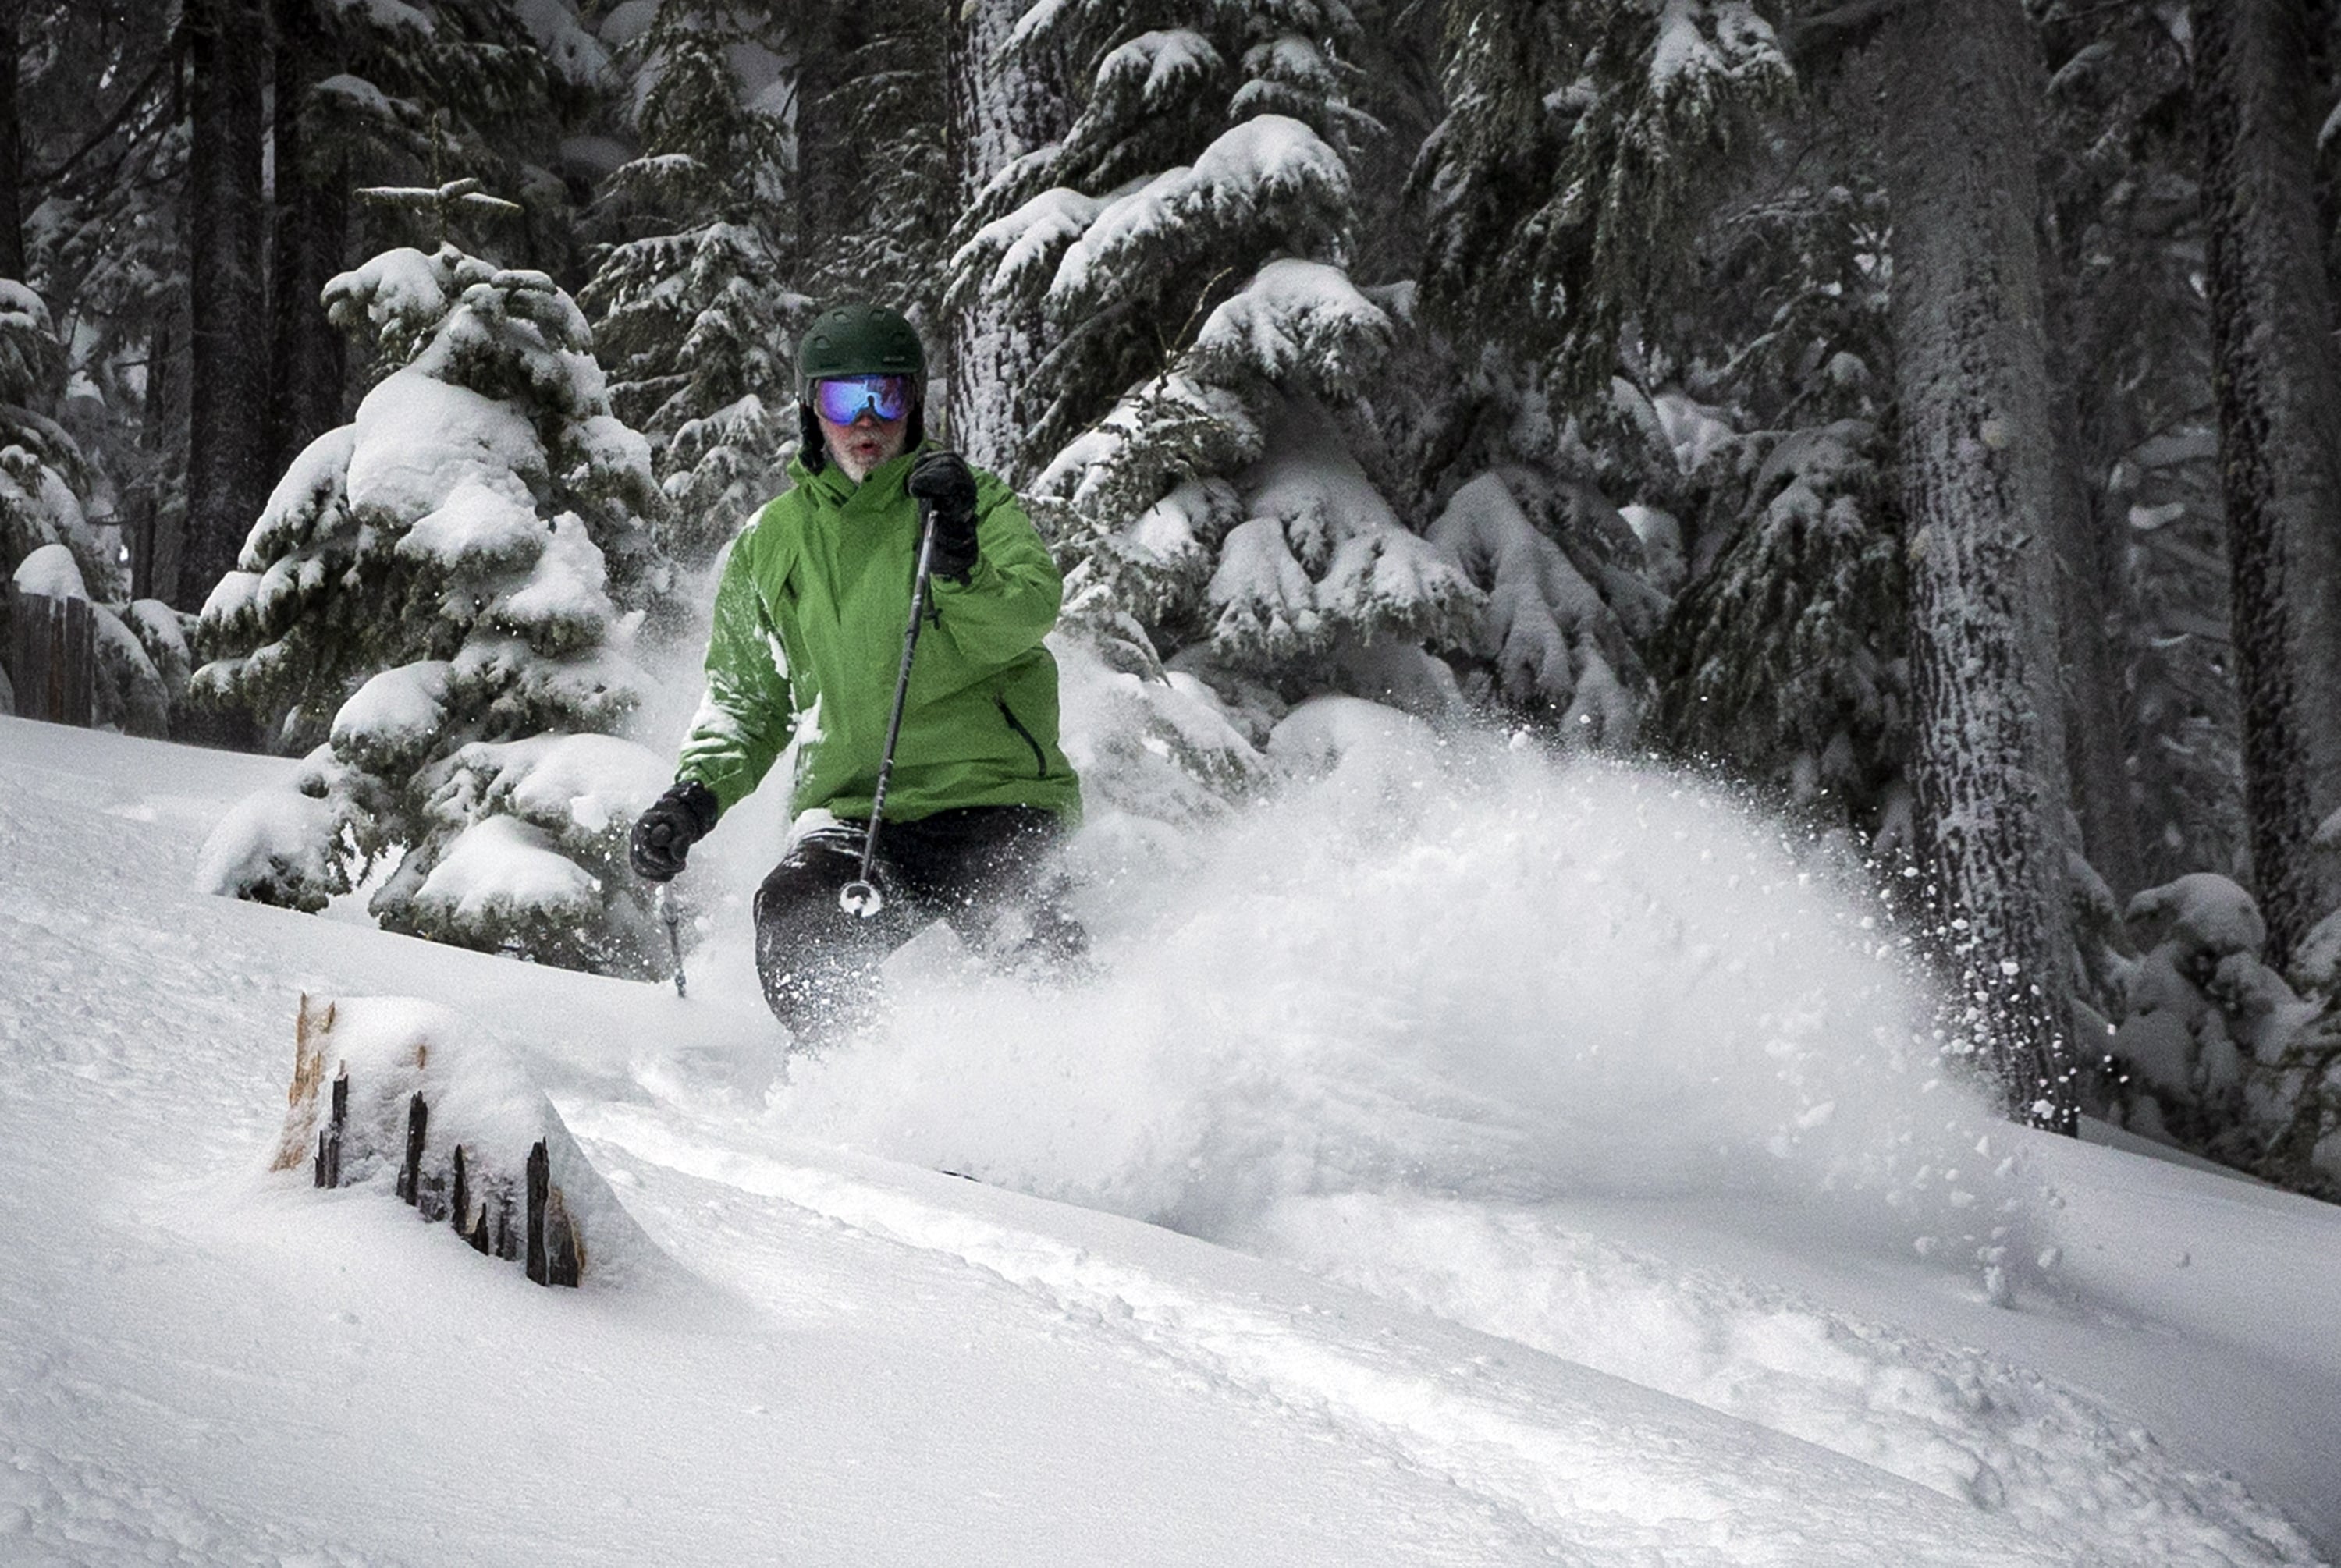 FILE - In this Feb. 13, 2019 file photo, Buz Mattson carves a turn in the trees while skiing at Willamette Pass Ski Area about 30 miles east of Oakridge, Ore. Winter storms that have dumped snow on the Cascade Range this month have helped Oregon's snowpack recover after lower-than-normal measurements in January and last year. The entire state has seen a 20 to 30 percent bump in snowpack and 2 to 3 times the normal precipitation since Feb. 1. As of Feb. 15, Oregon's total snowpack was 93 percent of average, compared to 73 percent at the end of January and a paltry 40 percent at this time last year.